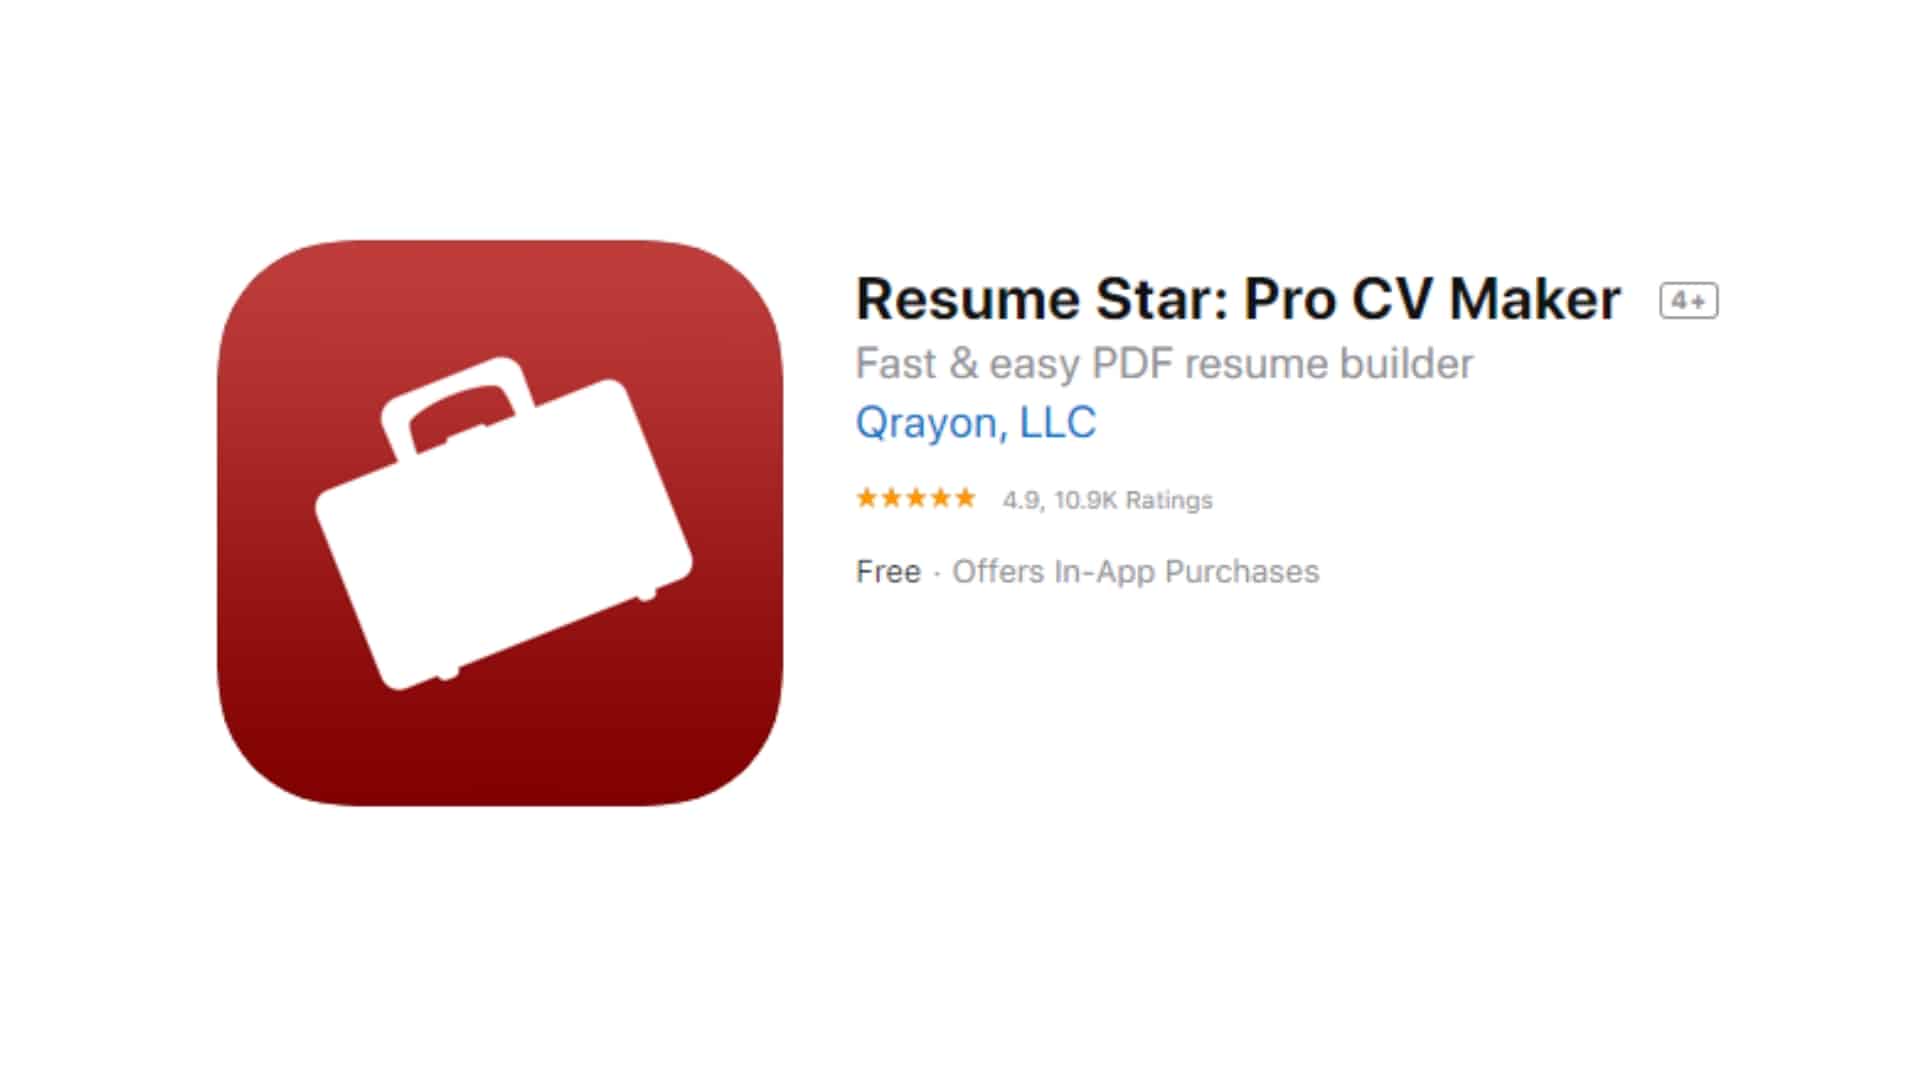 best resume apps for ipad